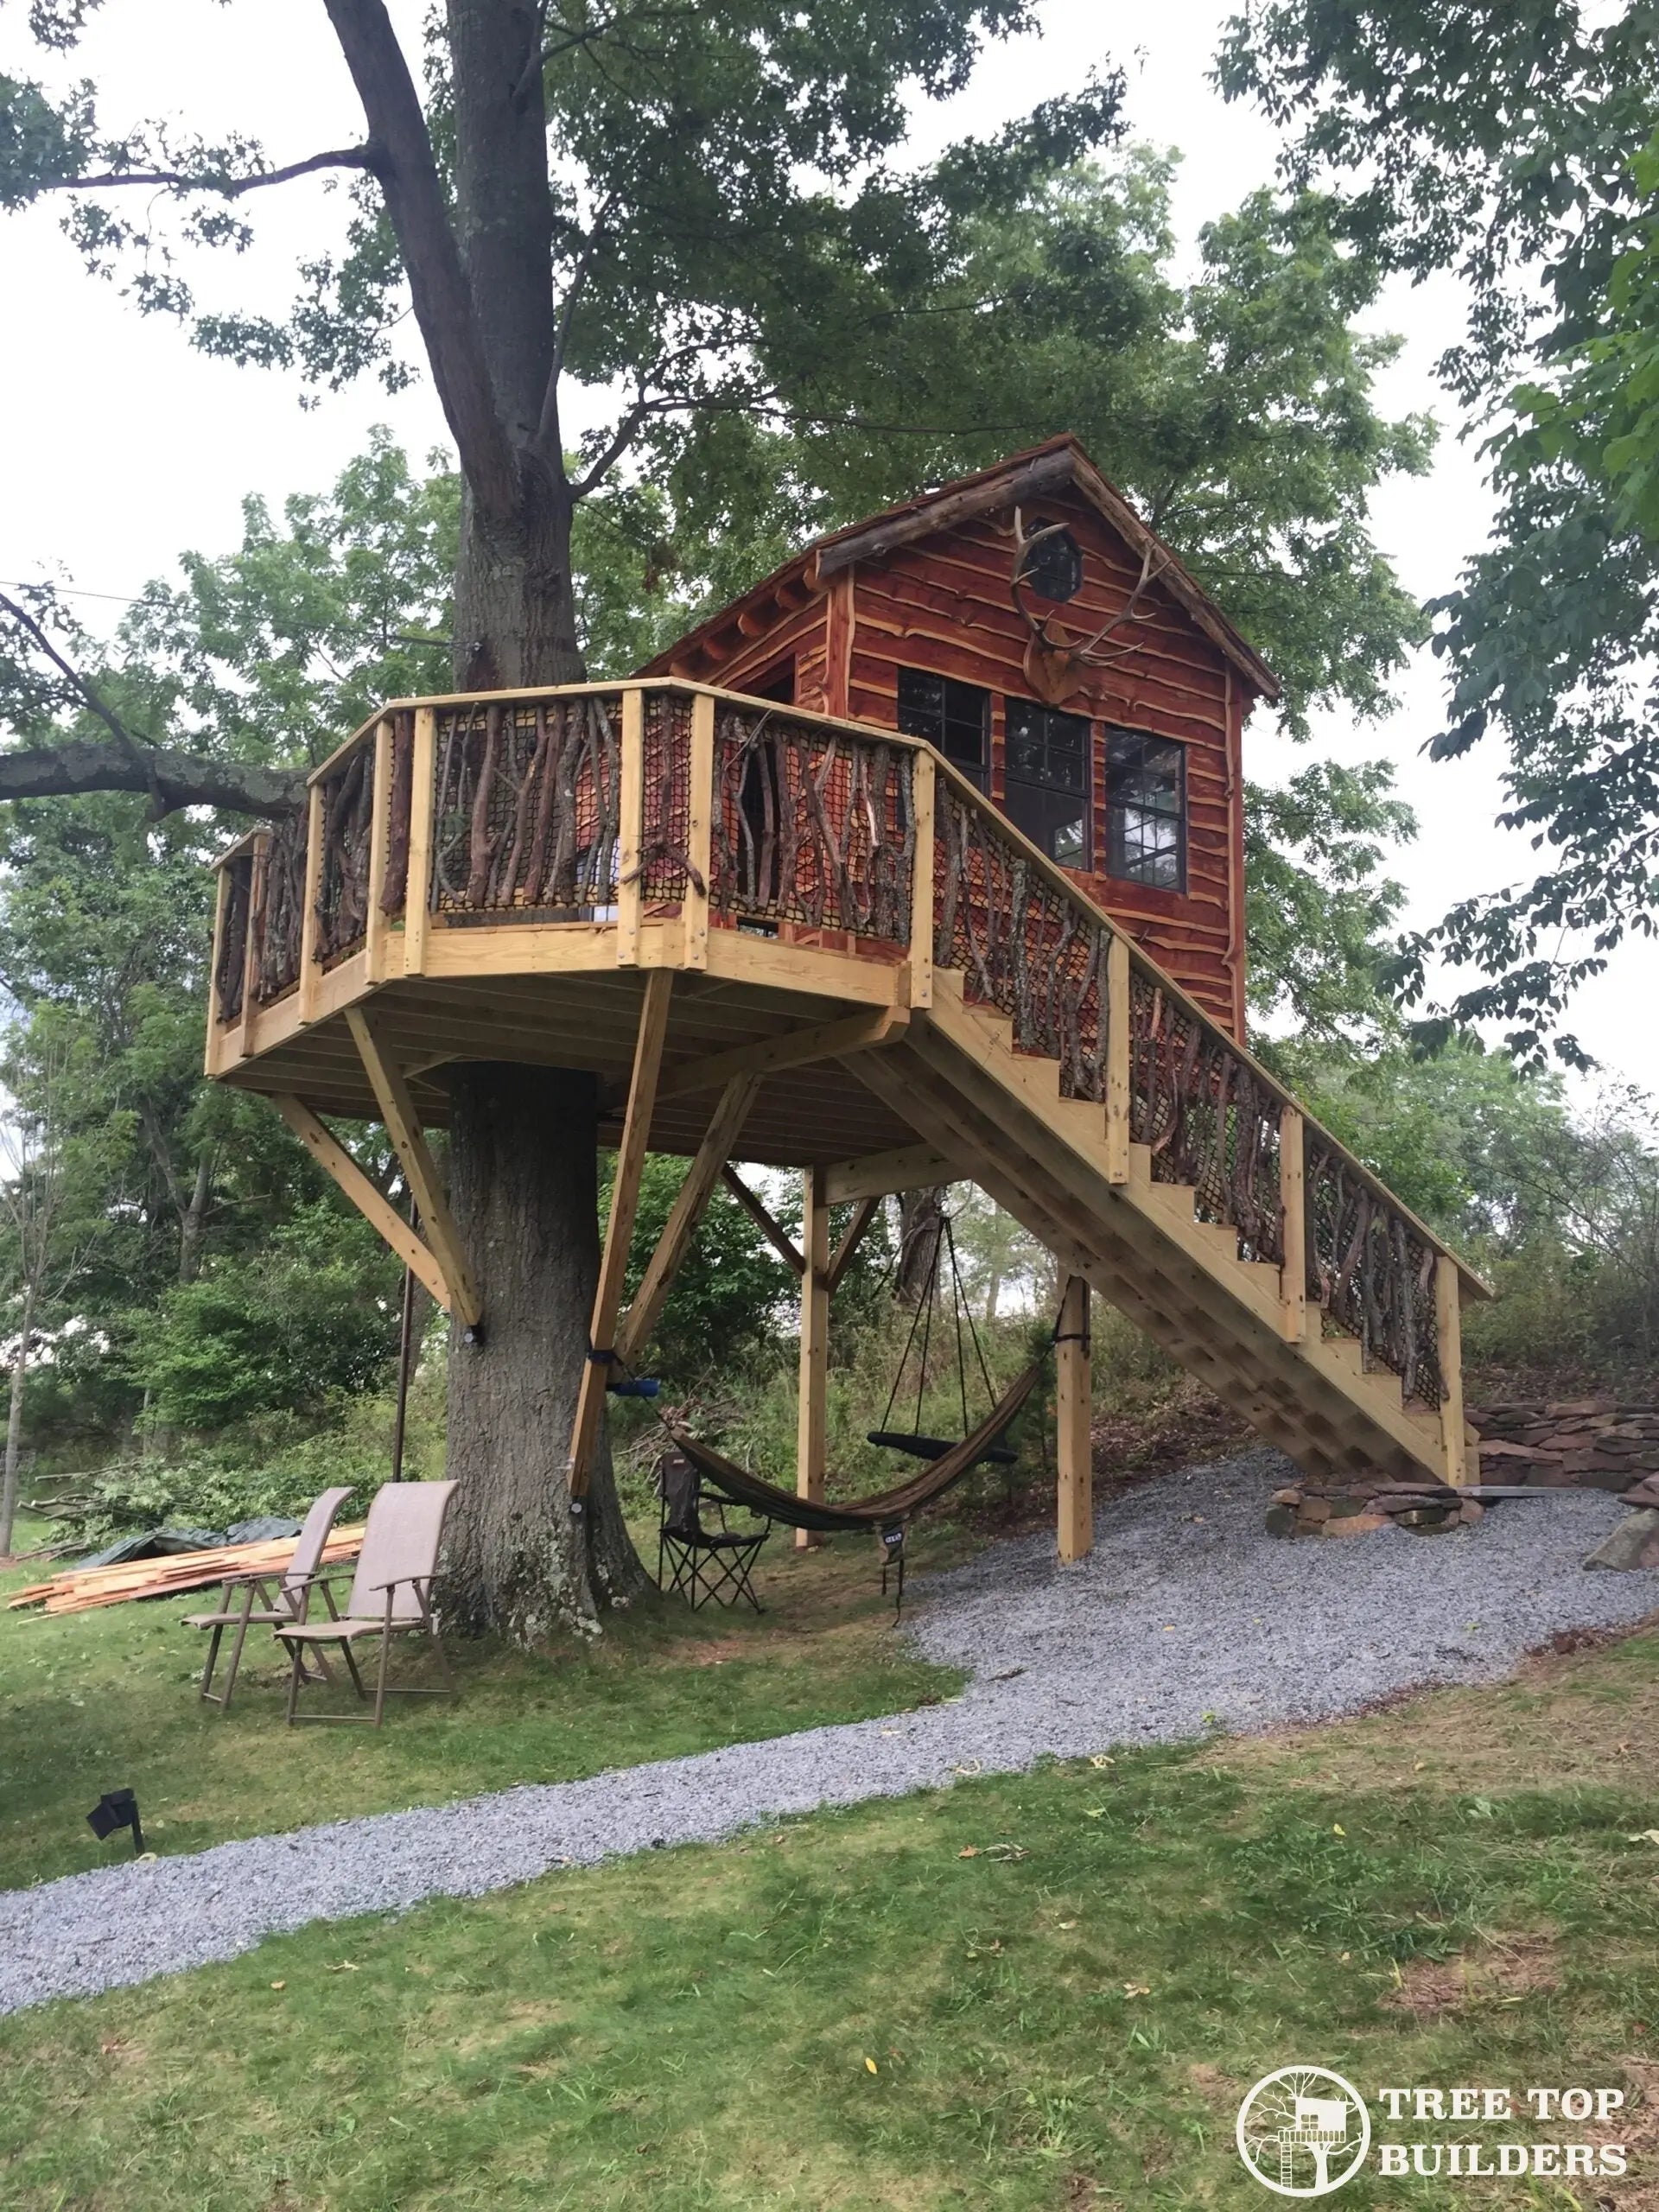 Tree Top Builders5 - New Jersey Treehouse